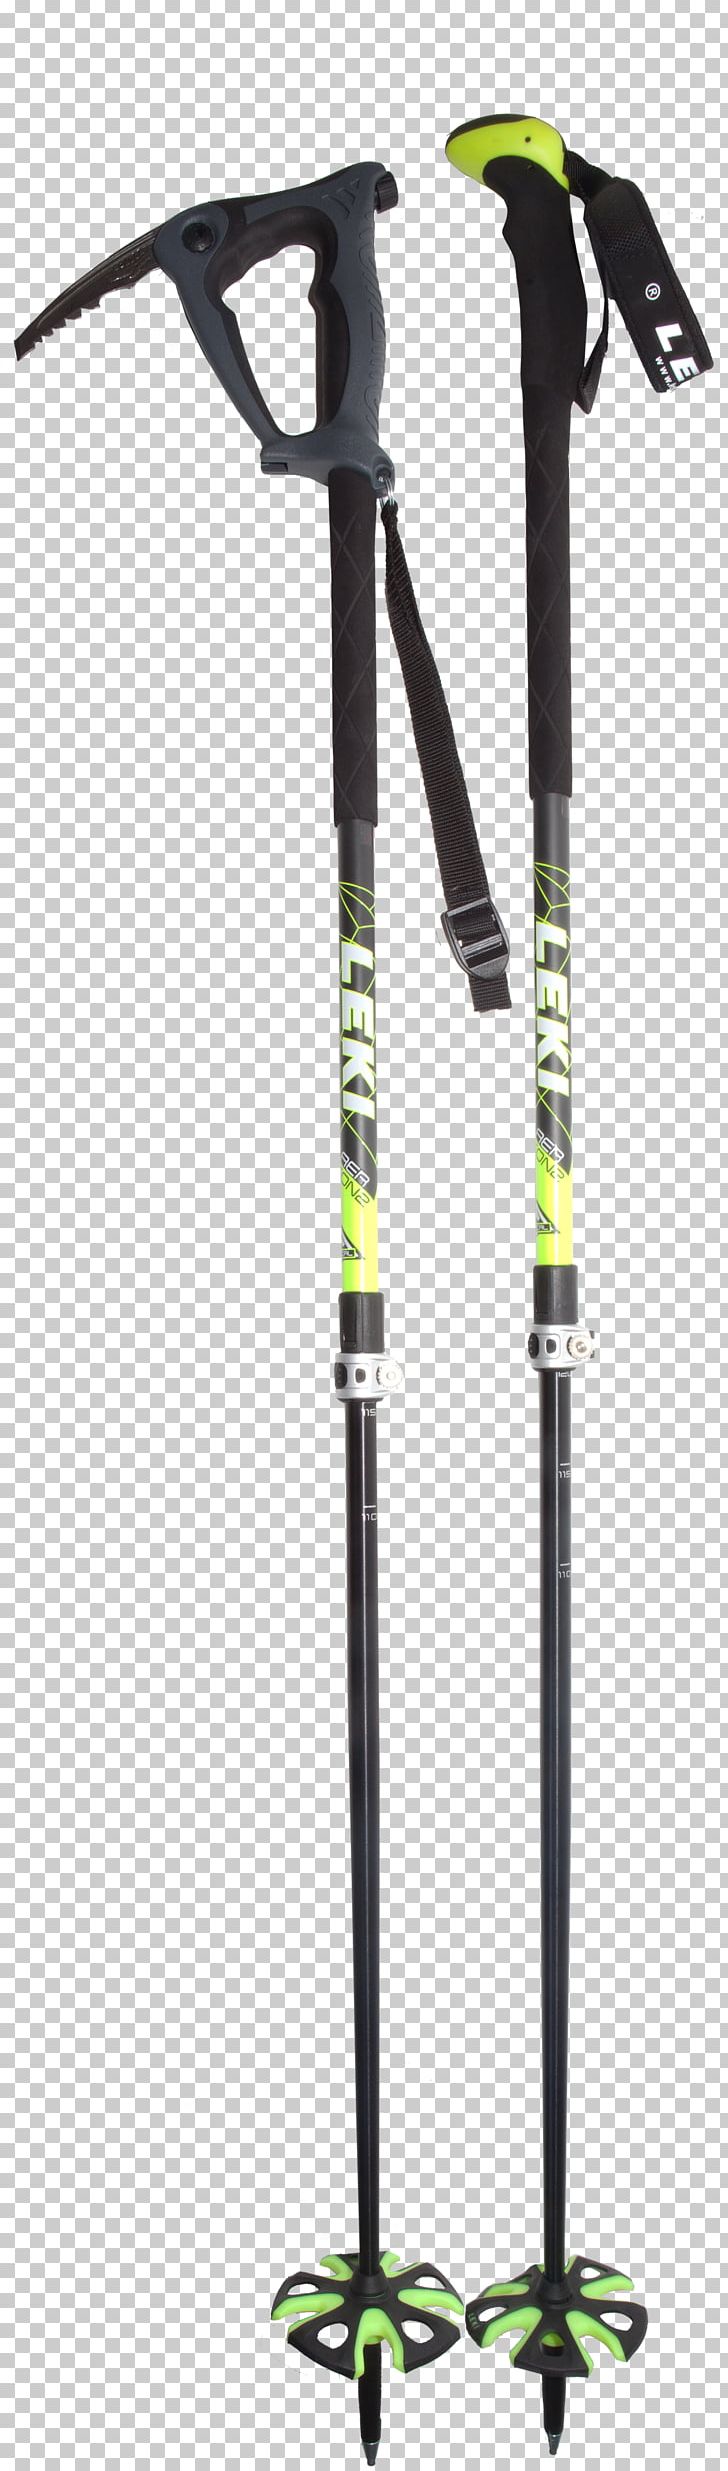 Hiking Poles LEKI Lenhart GmbH Ski Poles Pharmaceutical Drug Ice Axe PNG, Clipart, Backcountry Skiing, Bicycle, Bicycle Fork, Bicycle Frame, Bicycle Frames Free PNG Download